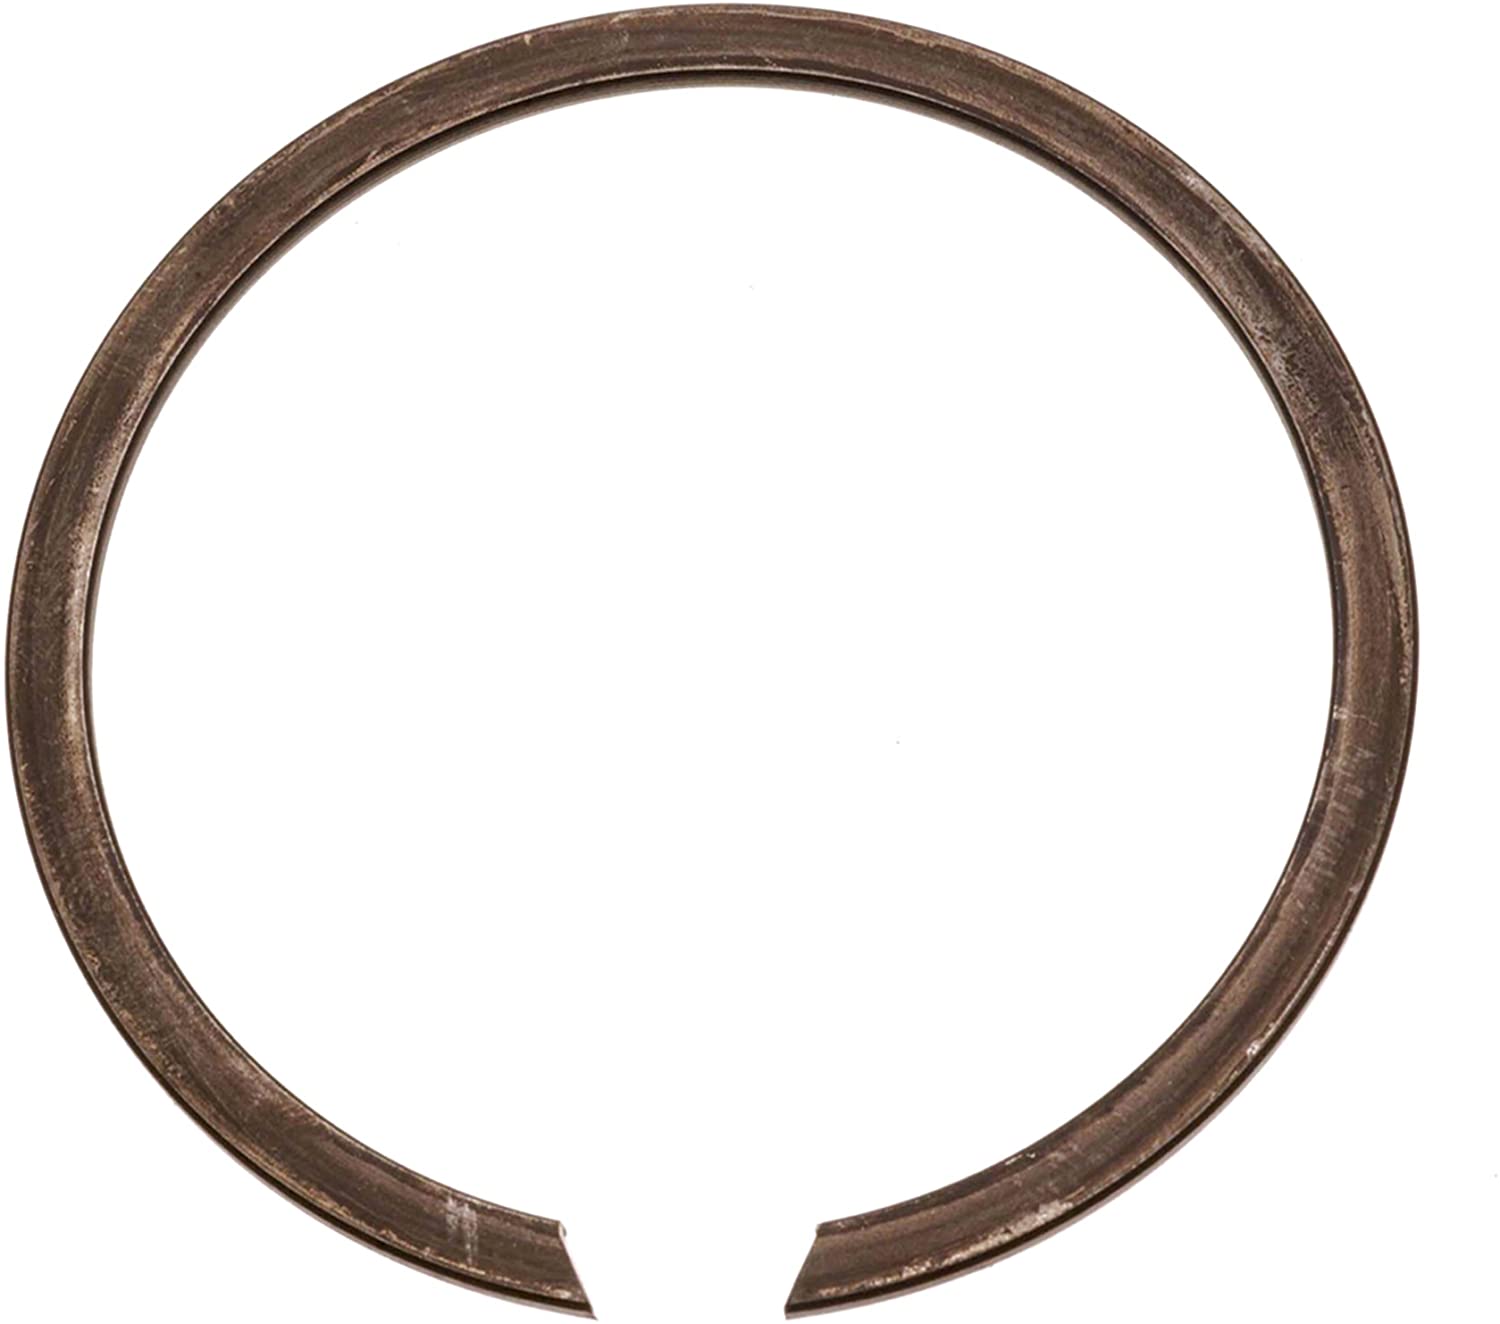 GM Genuine Parts 8661568 Automatic Transmission Overrun Clutch Spring Retaining Ring